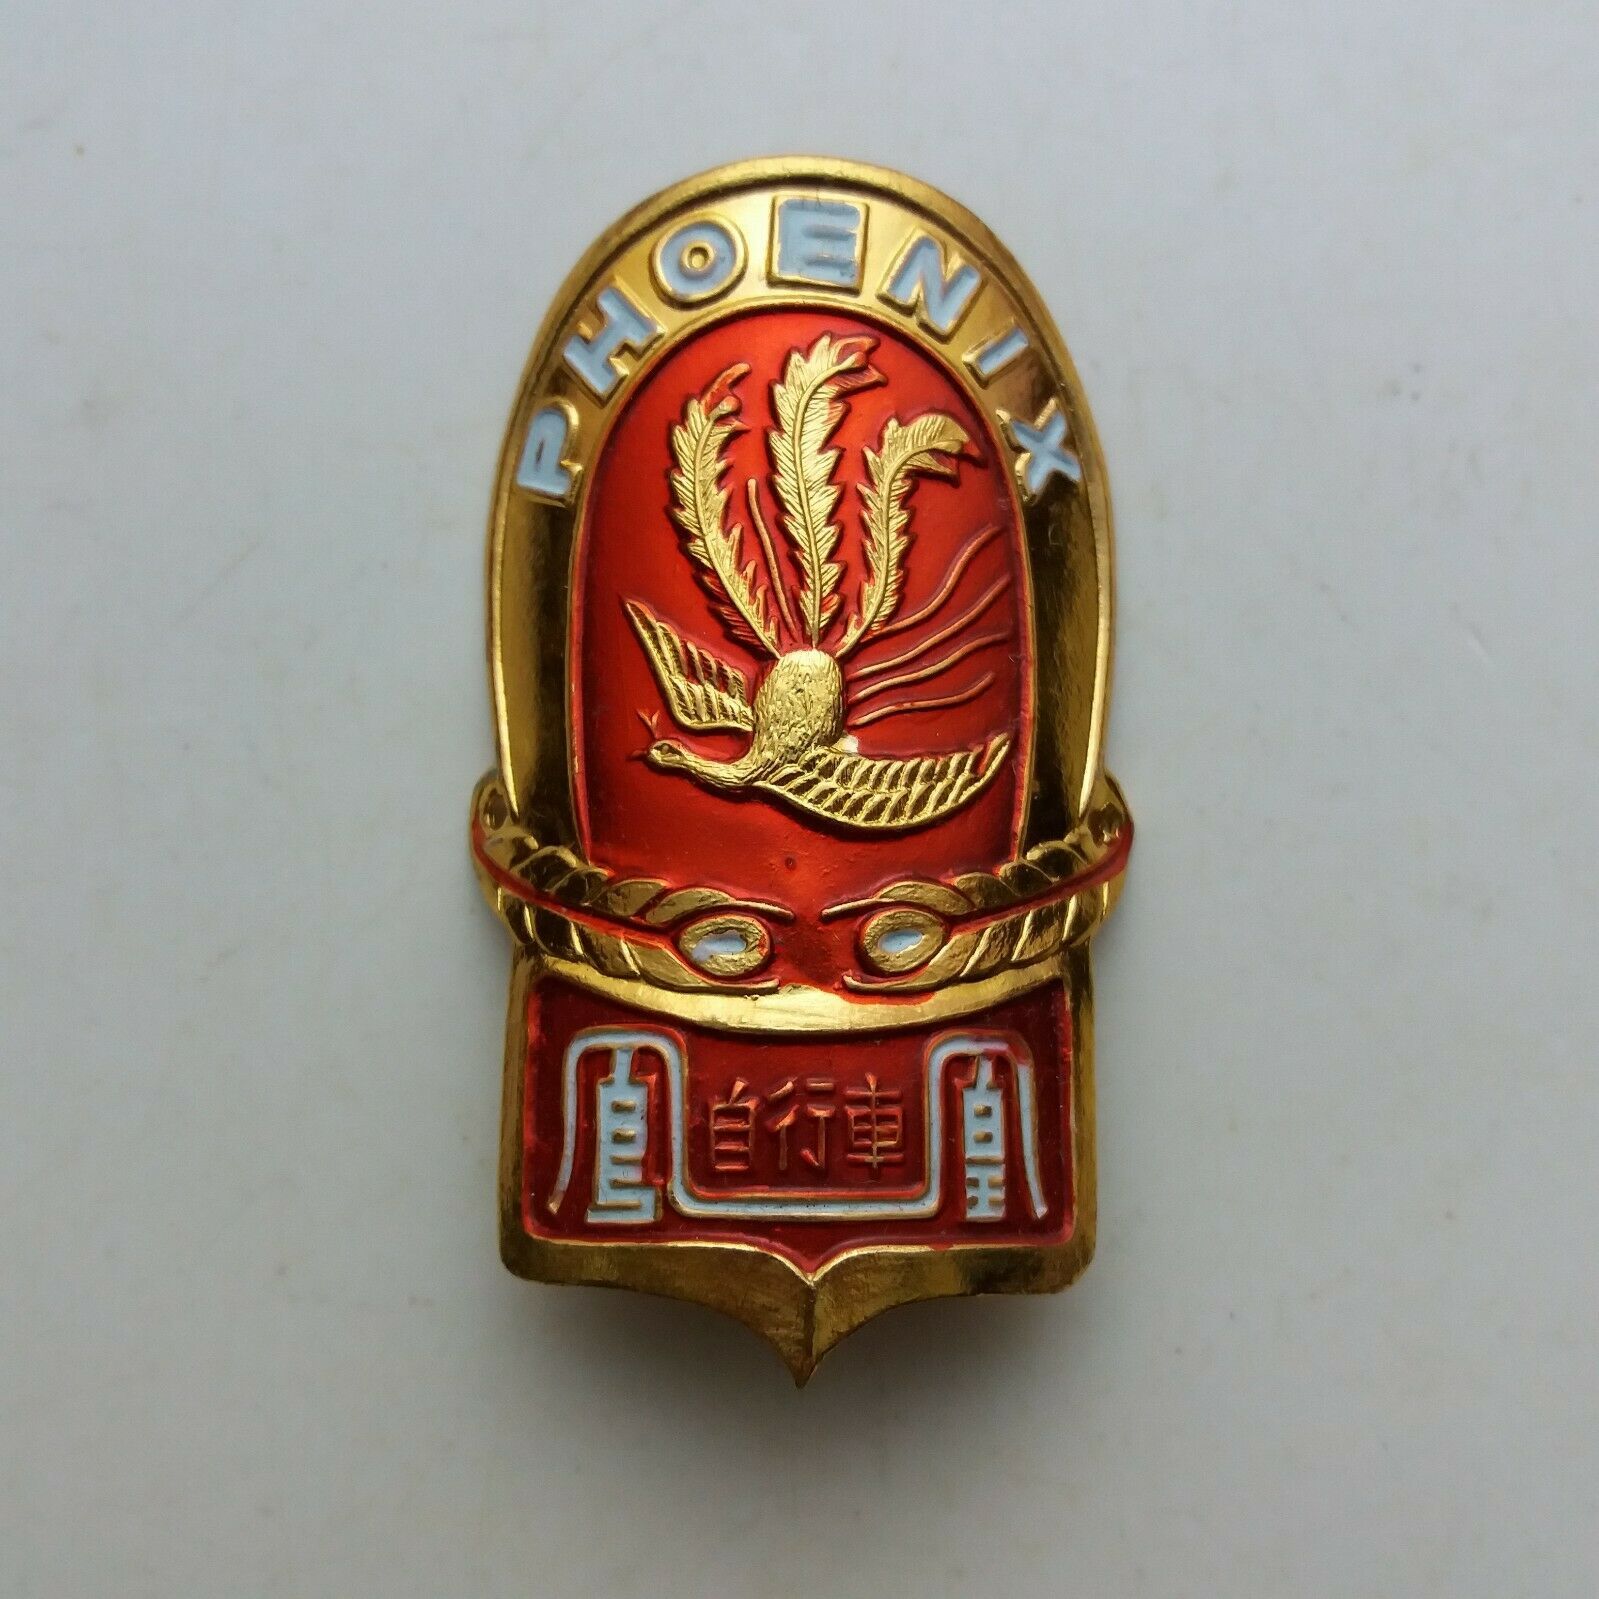 BSA Emblem Aluminum Head Badge For BSA Vintage Bicycle NOS Free Shipping 